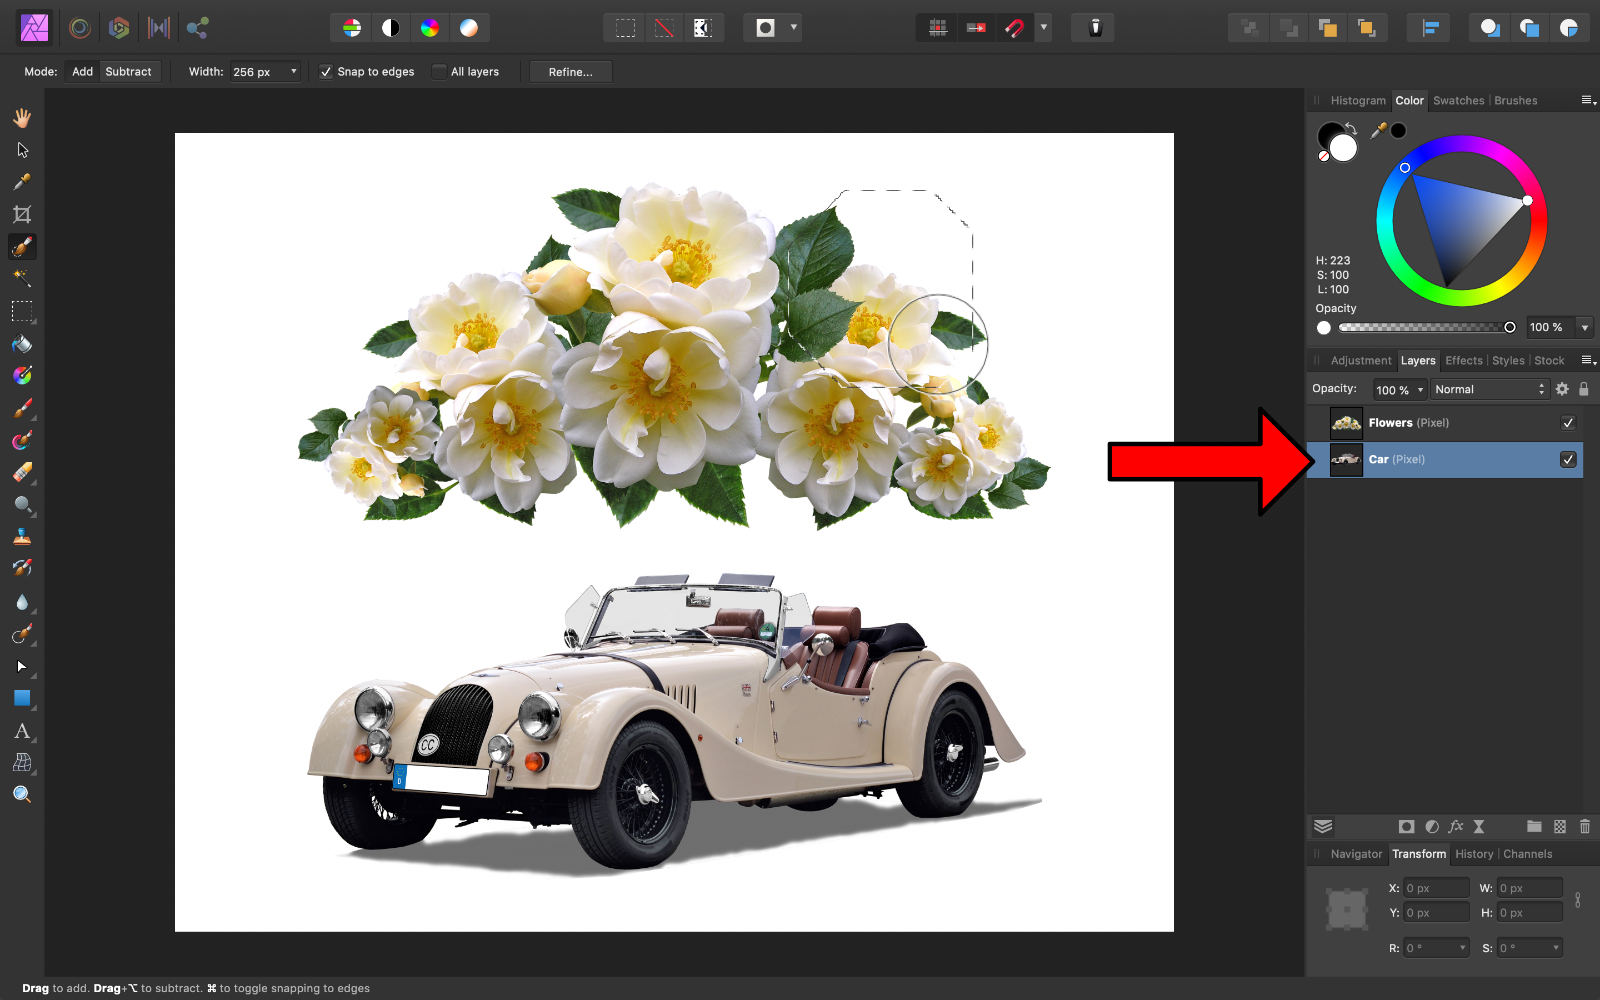 Car layer selected, try selecting flowers